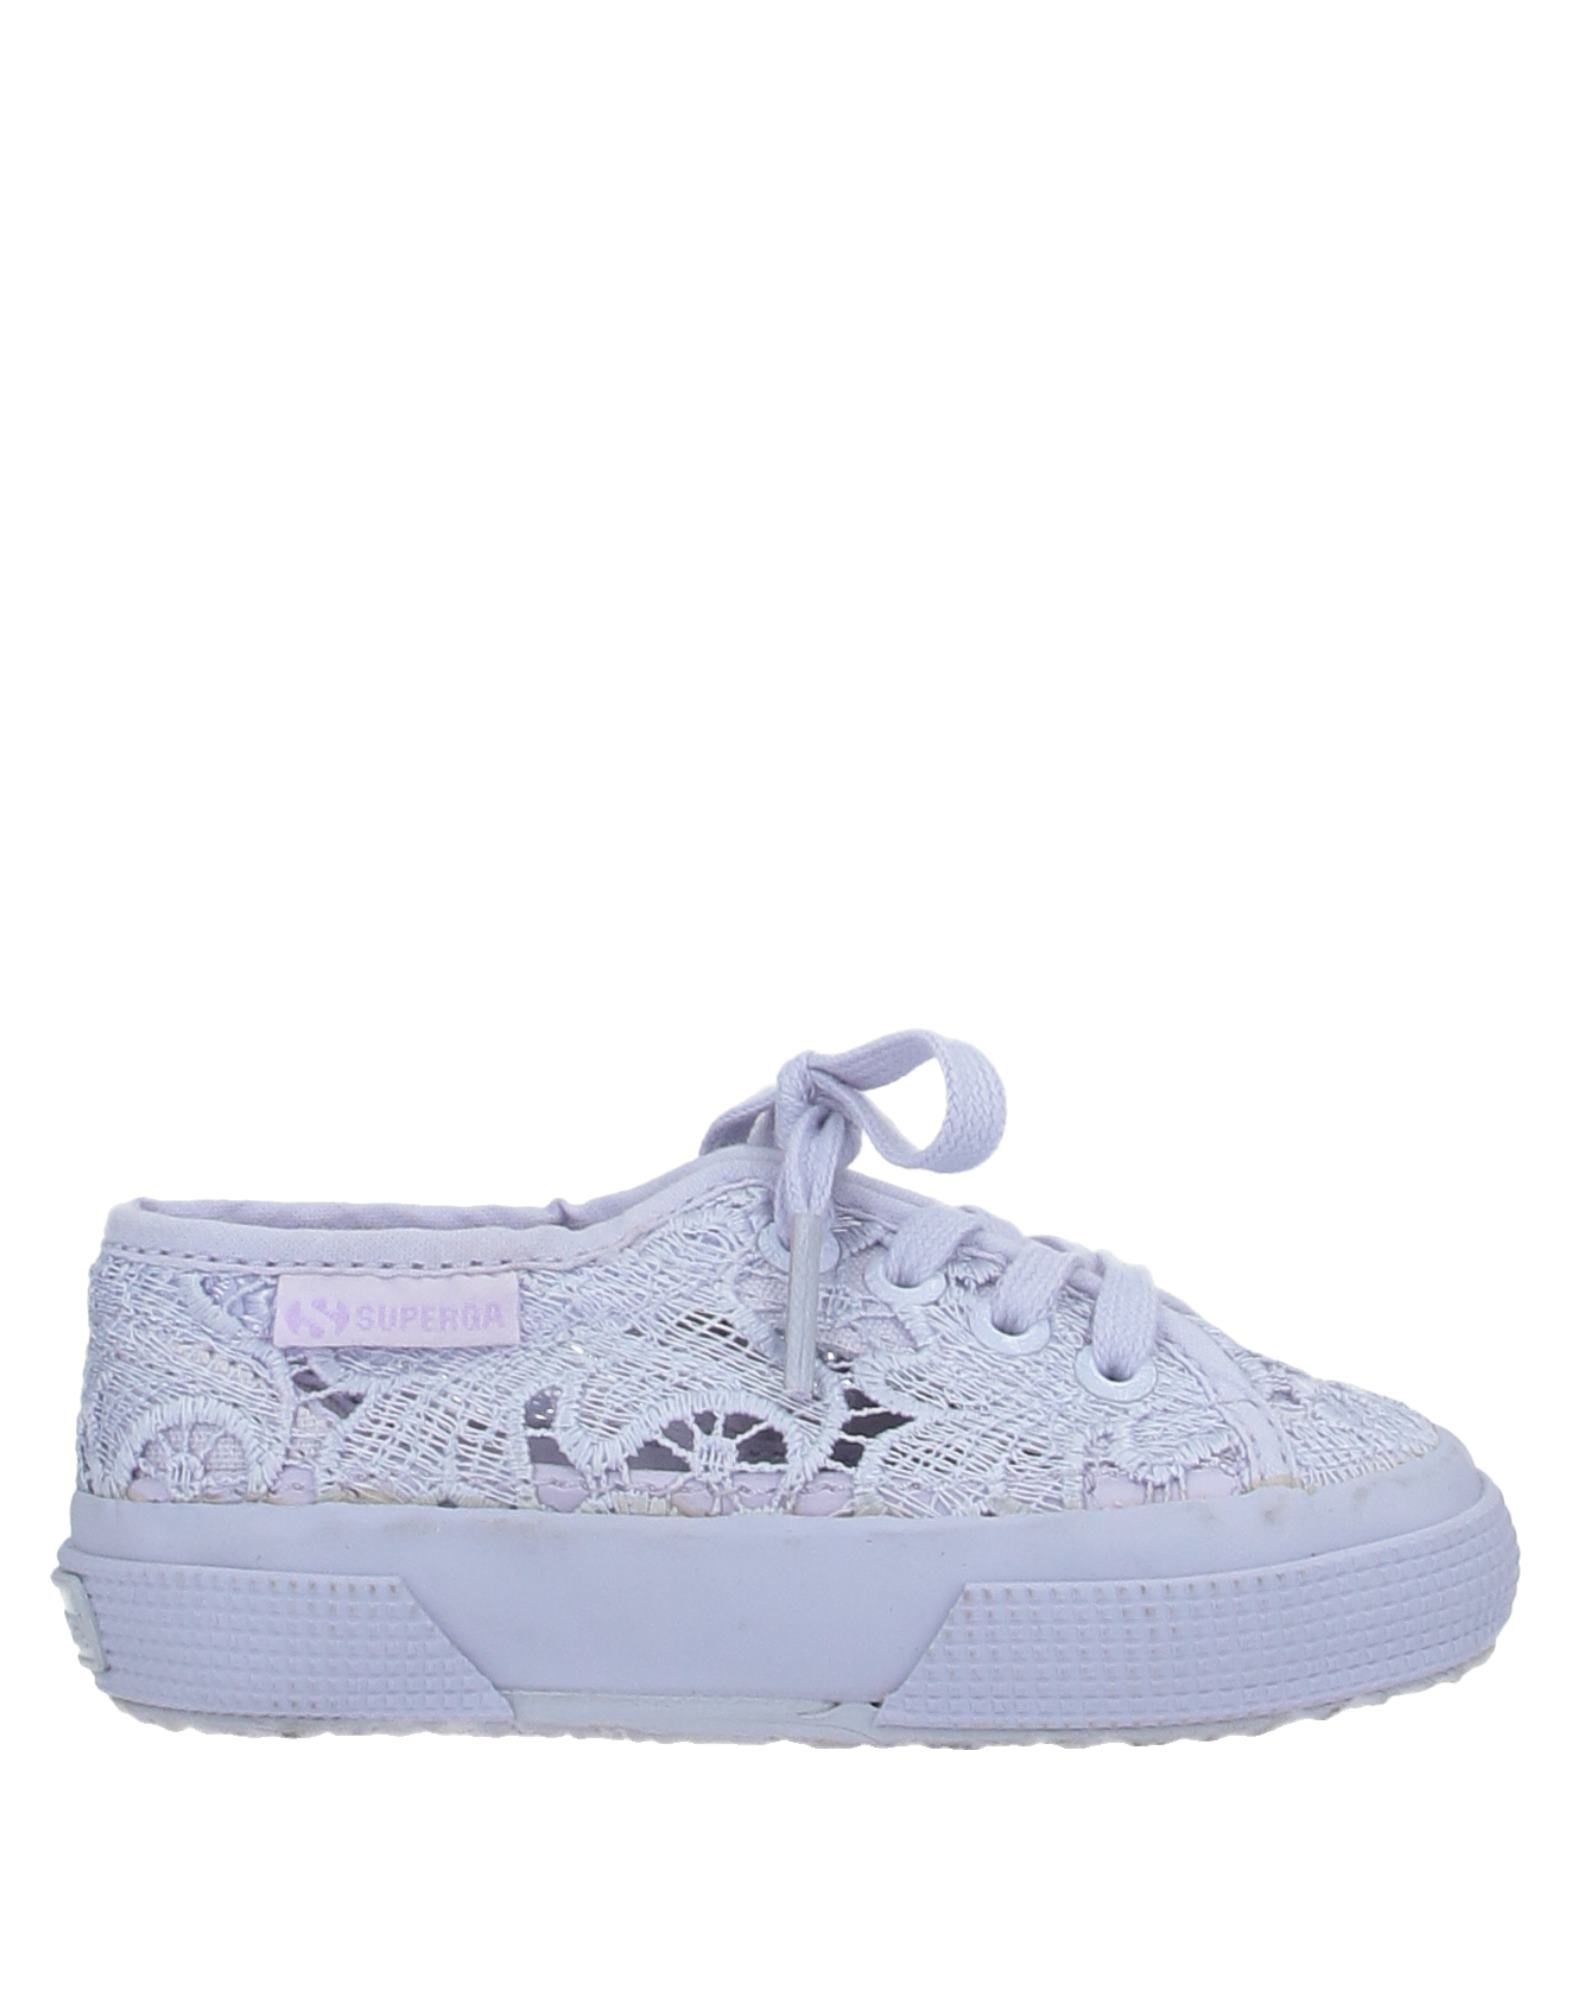 Superga Kids' Sneakers In Lilac